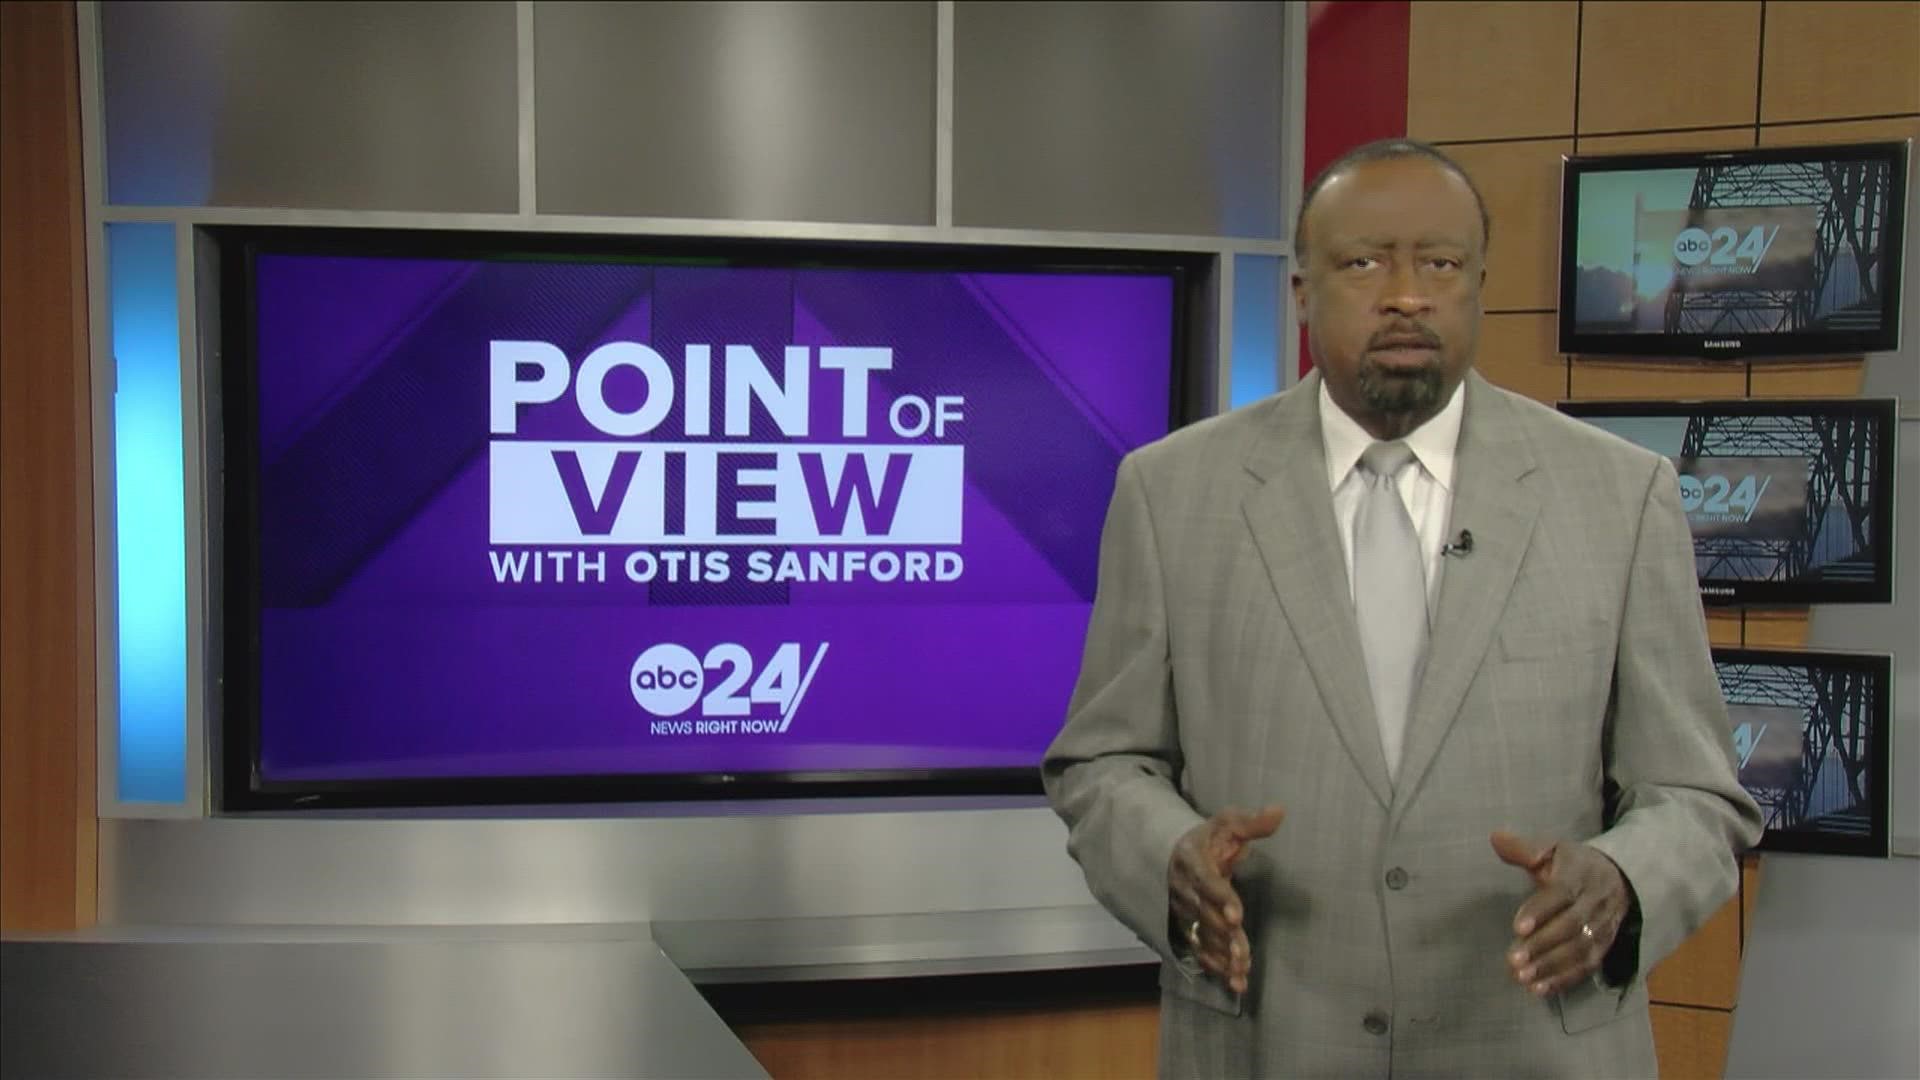 ABC24 political analyst and commentator Otis Sanford shared his point of view on gun bills that were killed in the Tennessee legislature.